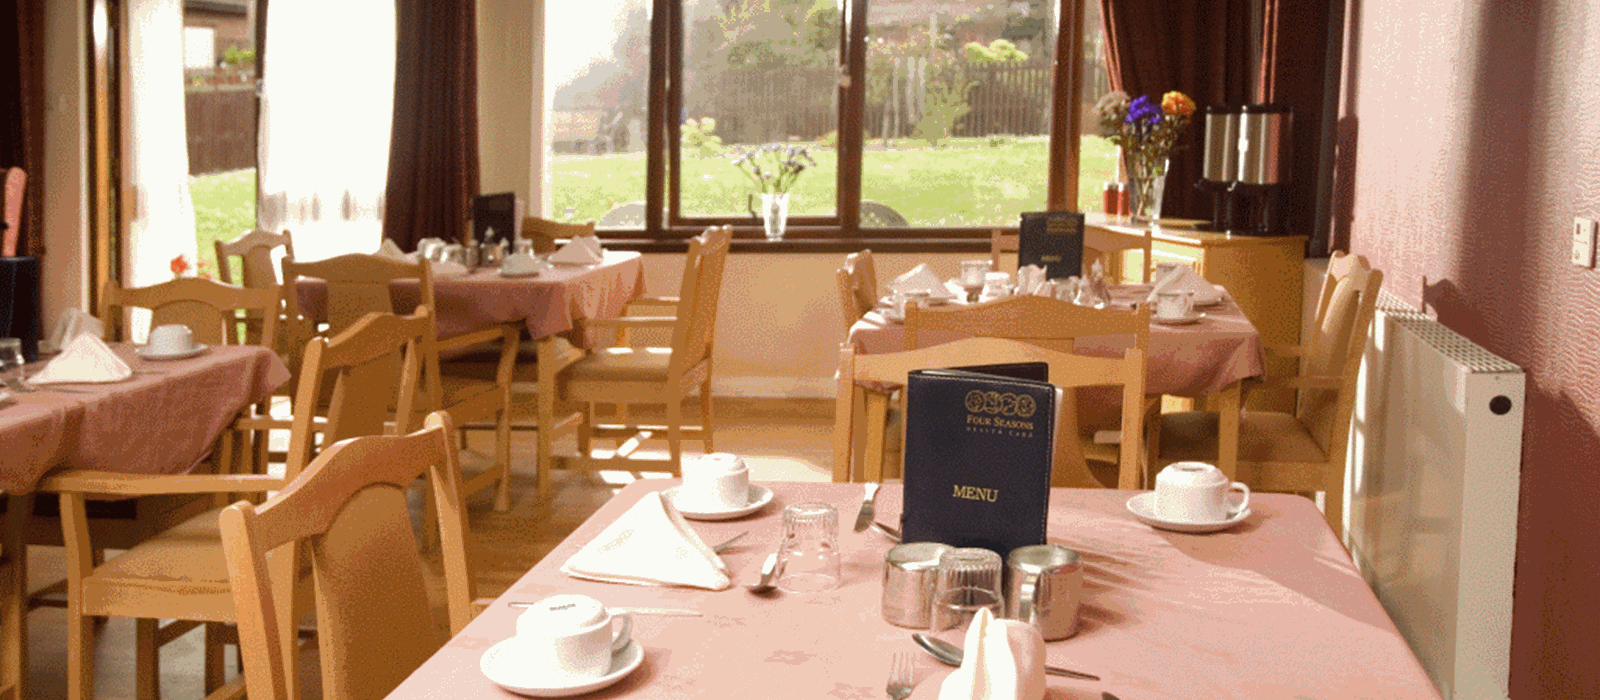 Benarty View Care Home, Kelty, KY4 0FY